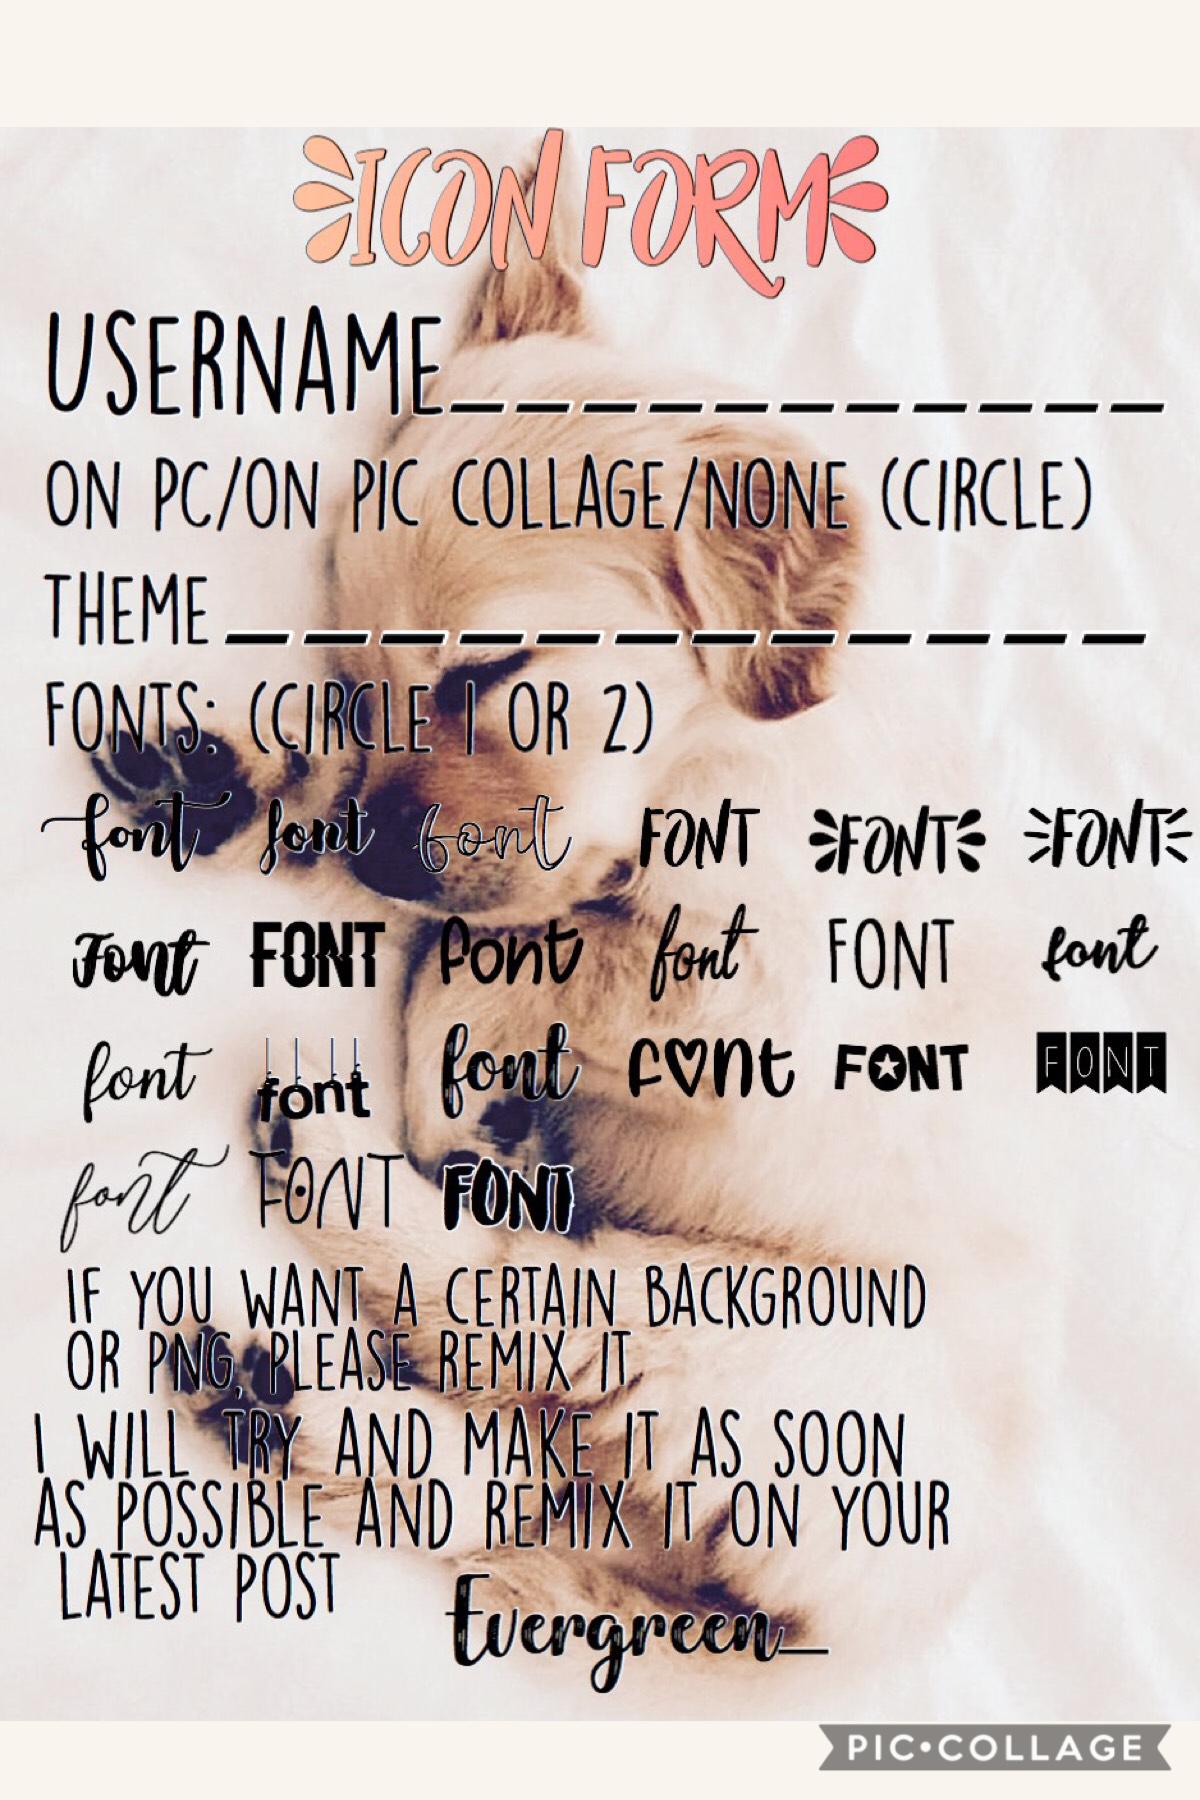 Tap! ❤️

Icon Form! Please tell people about my icon contest! 💛